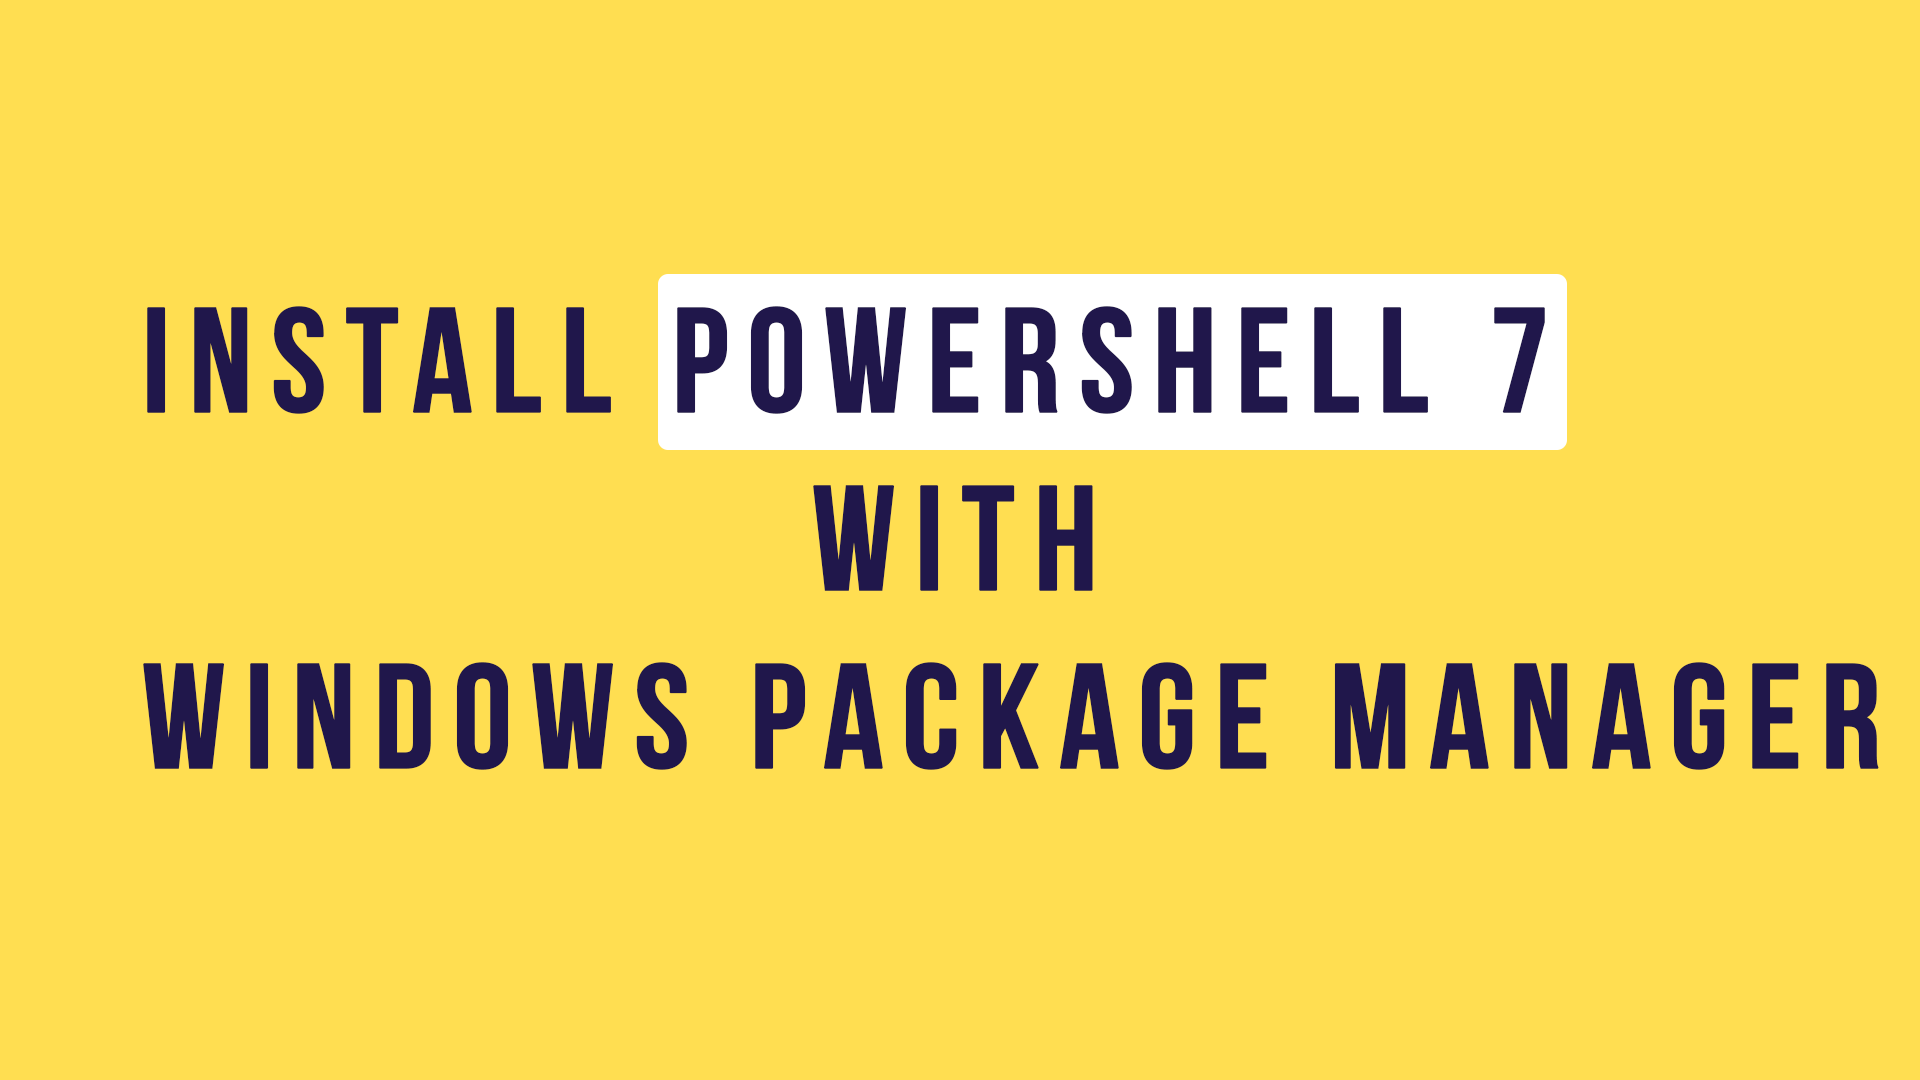 Install PowerShell 7 with Windows Package Manager